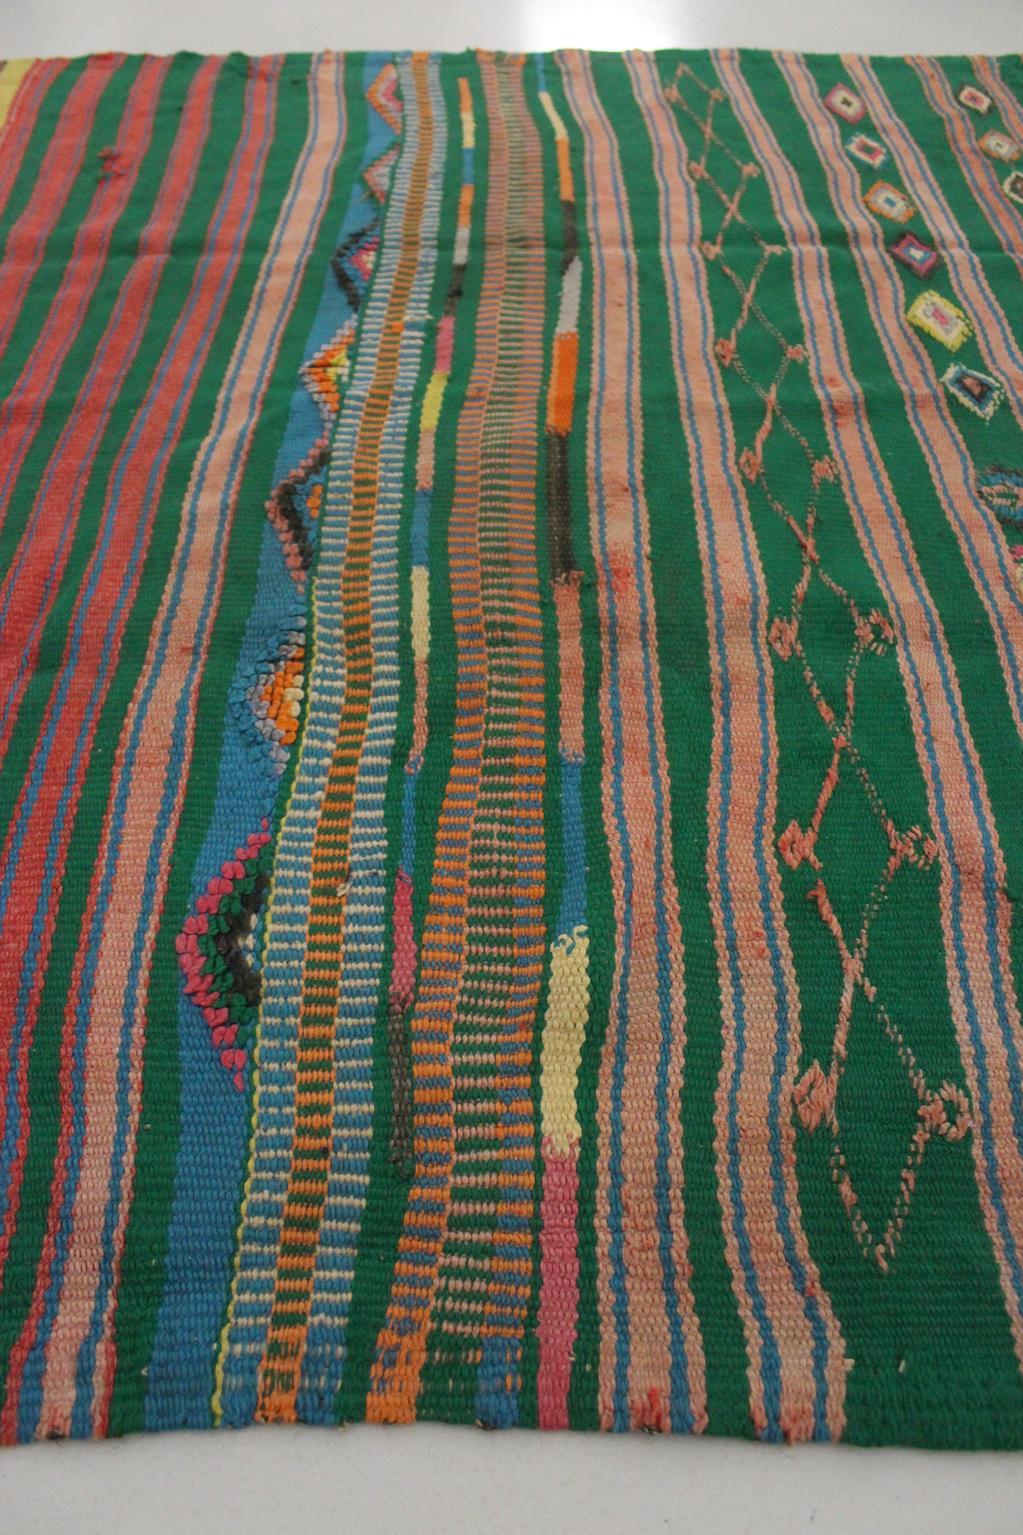 Vintage Moroccan striped kilim rug - Green/pink/red - 5.1x10.2feet / 157x312cm For Sale 3